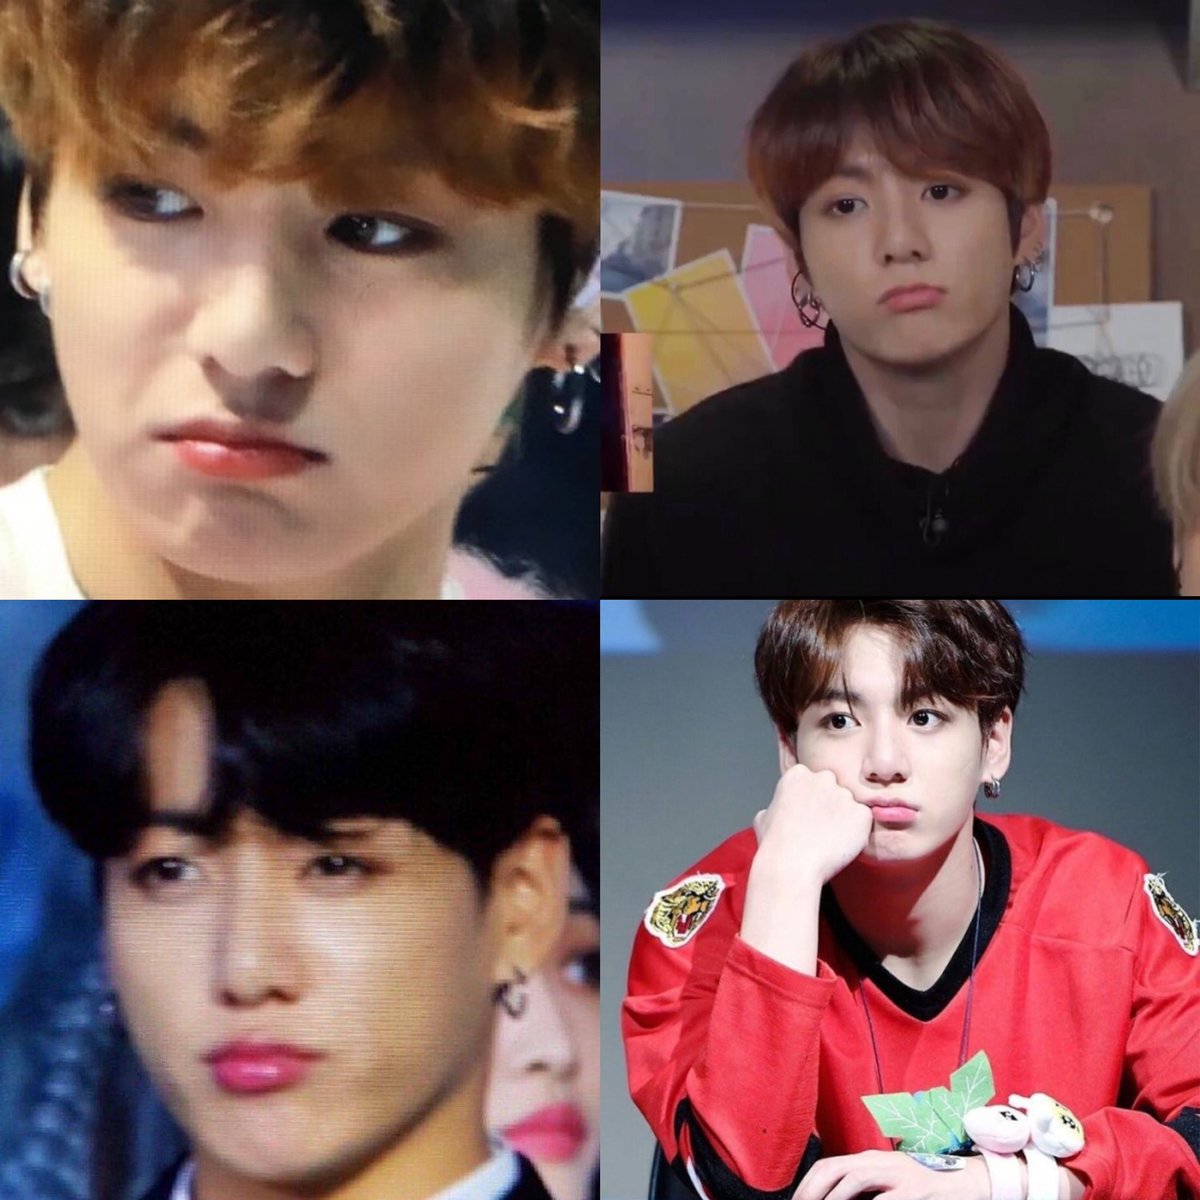 Jungkook baby eye pout and little teeth smile pt. 2 